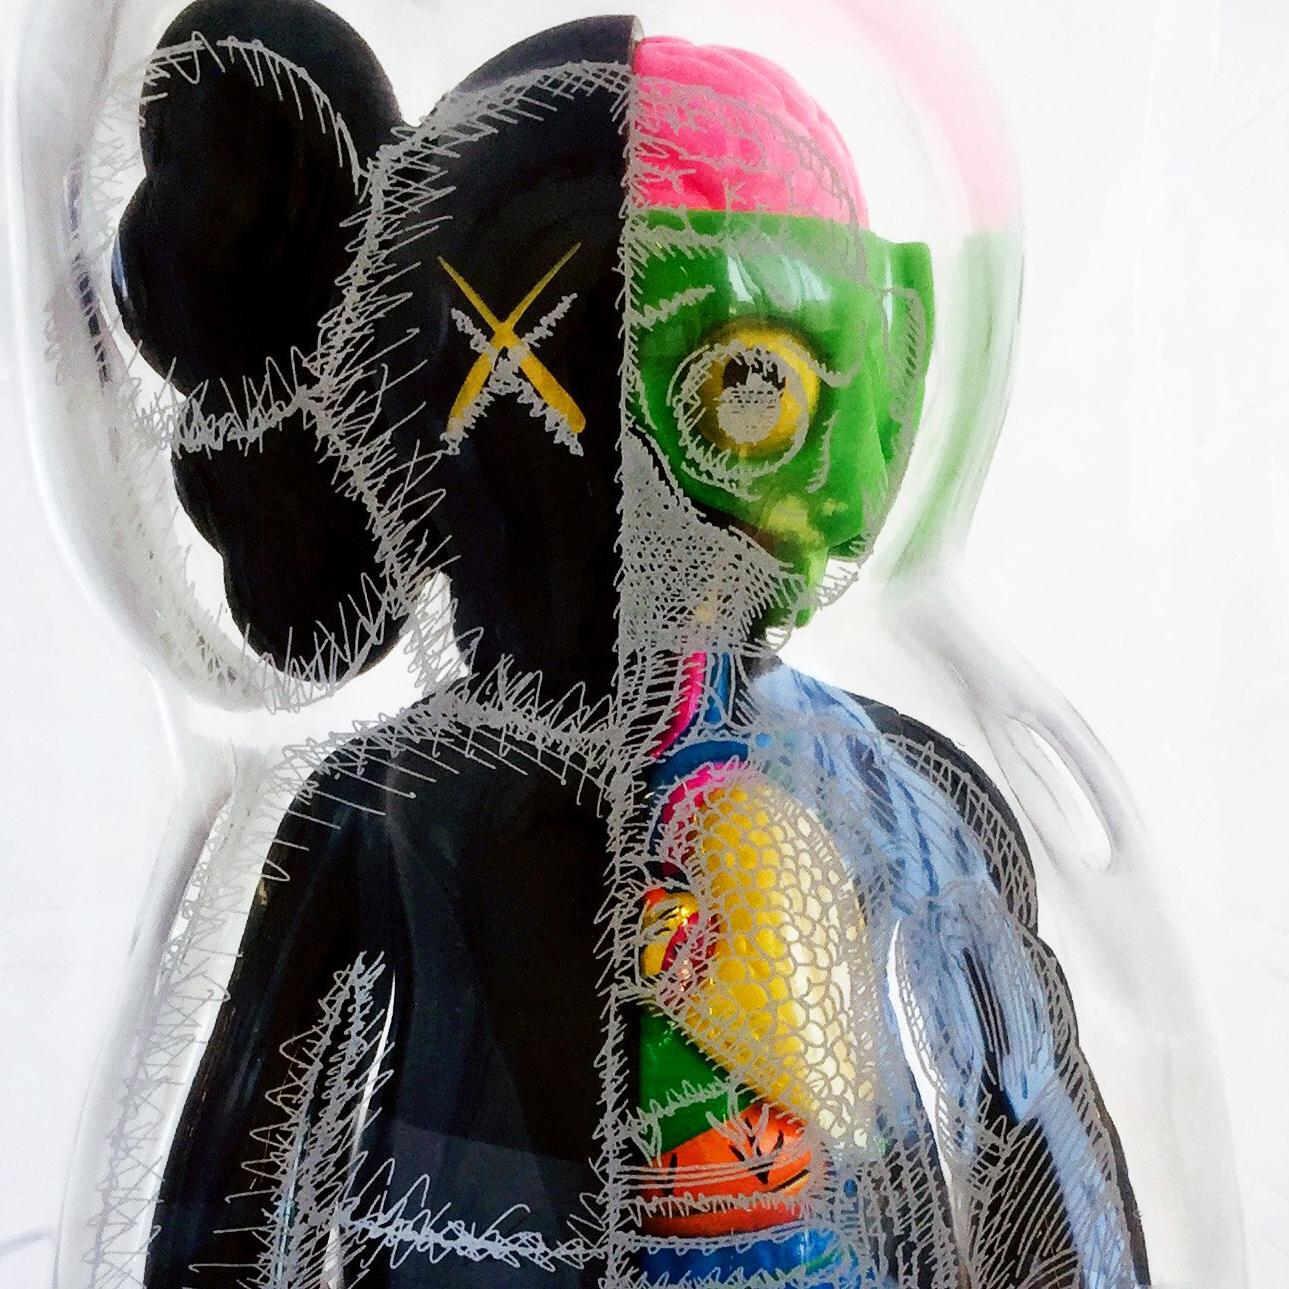 KAWS Black Flayed Companion 2016. A brilliant KAWS figurative sculpture new and sealed in its original packaging. Published by Medicom Japan in conjunction with the exhibition, KAWS: Where The End Starts at the Modern Art Museum of Fort Worth. Sold